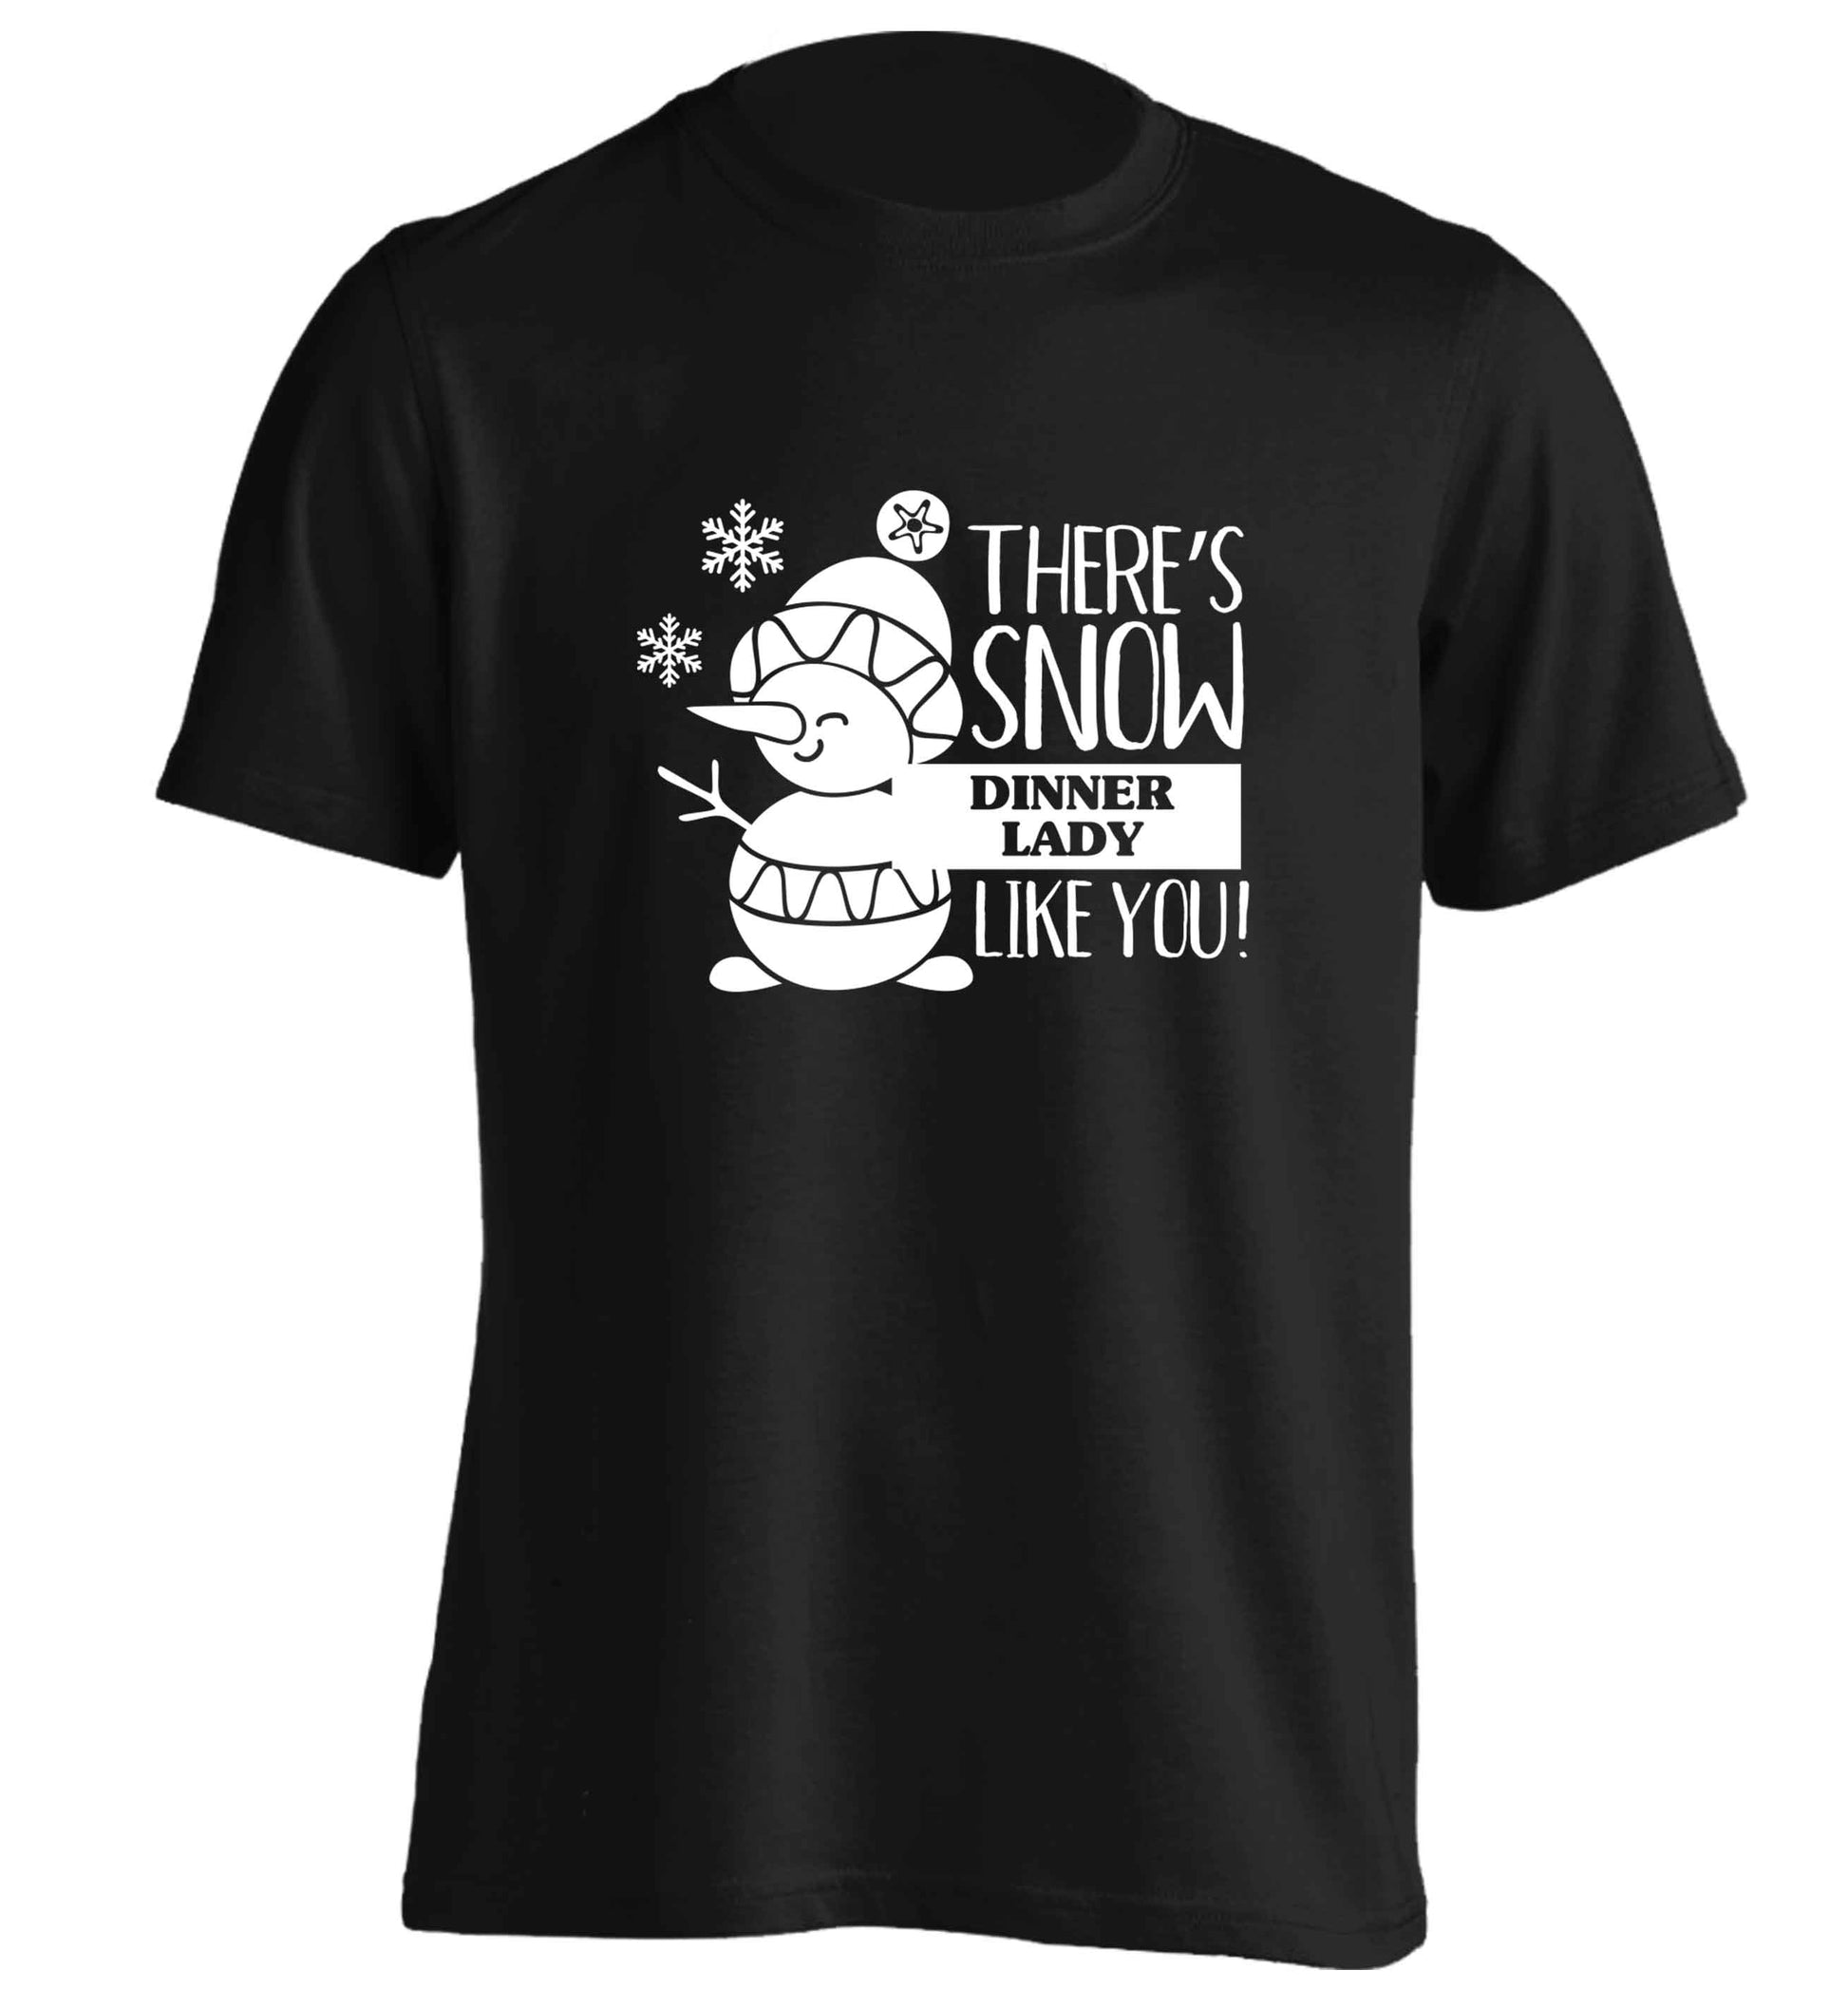 There's snow dinner lady like you adults unisex black Tshirt 2XL